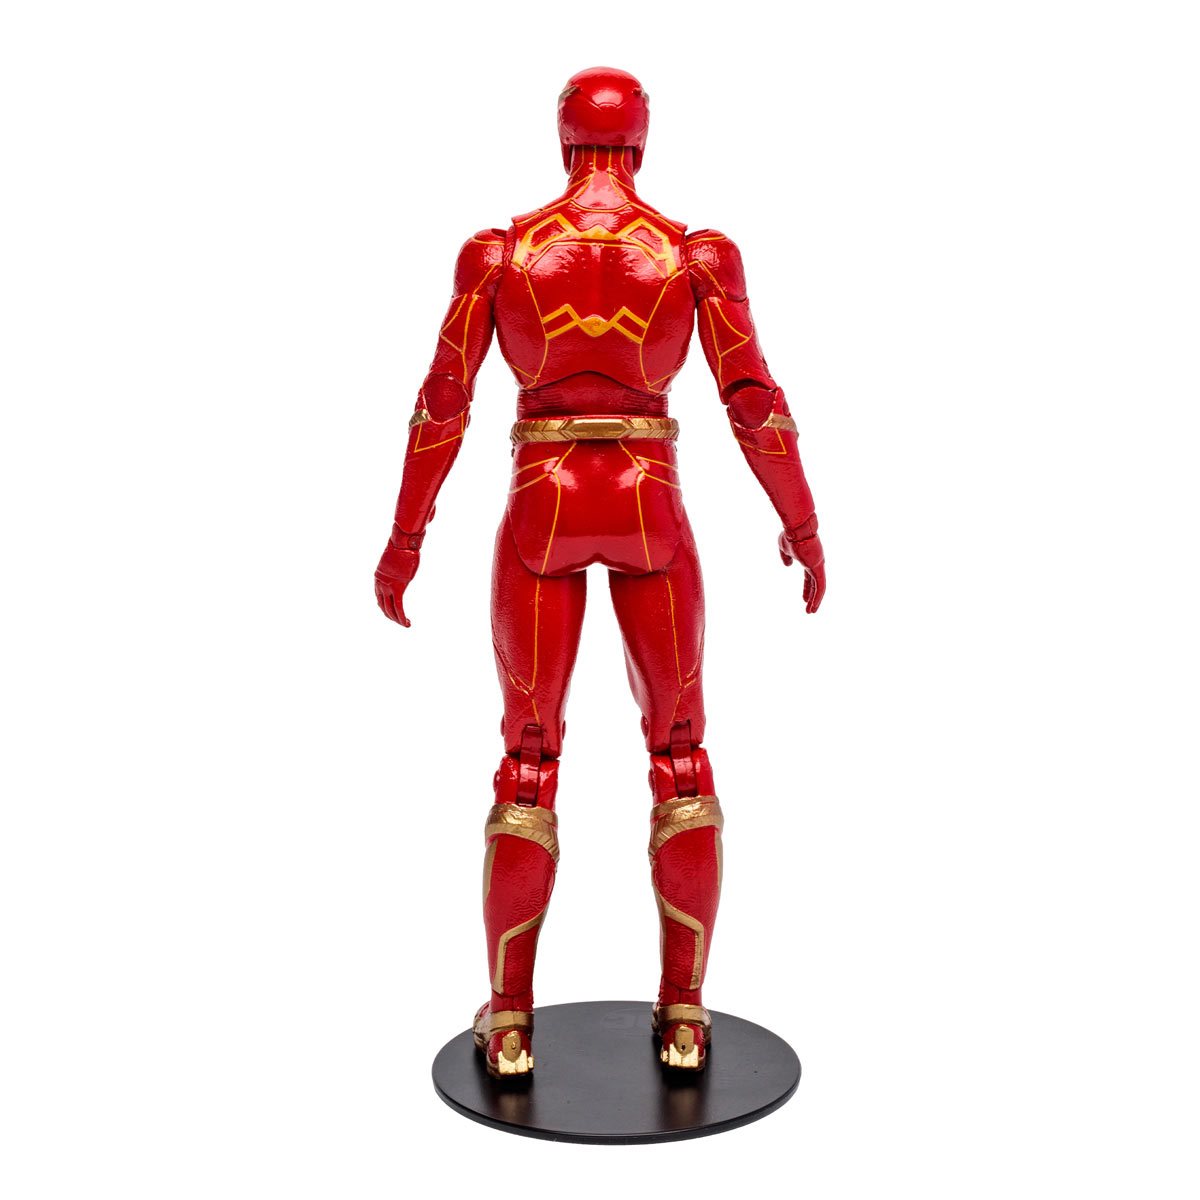 DC The Flash Movie 7-Inch Scale Action Figure